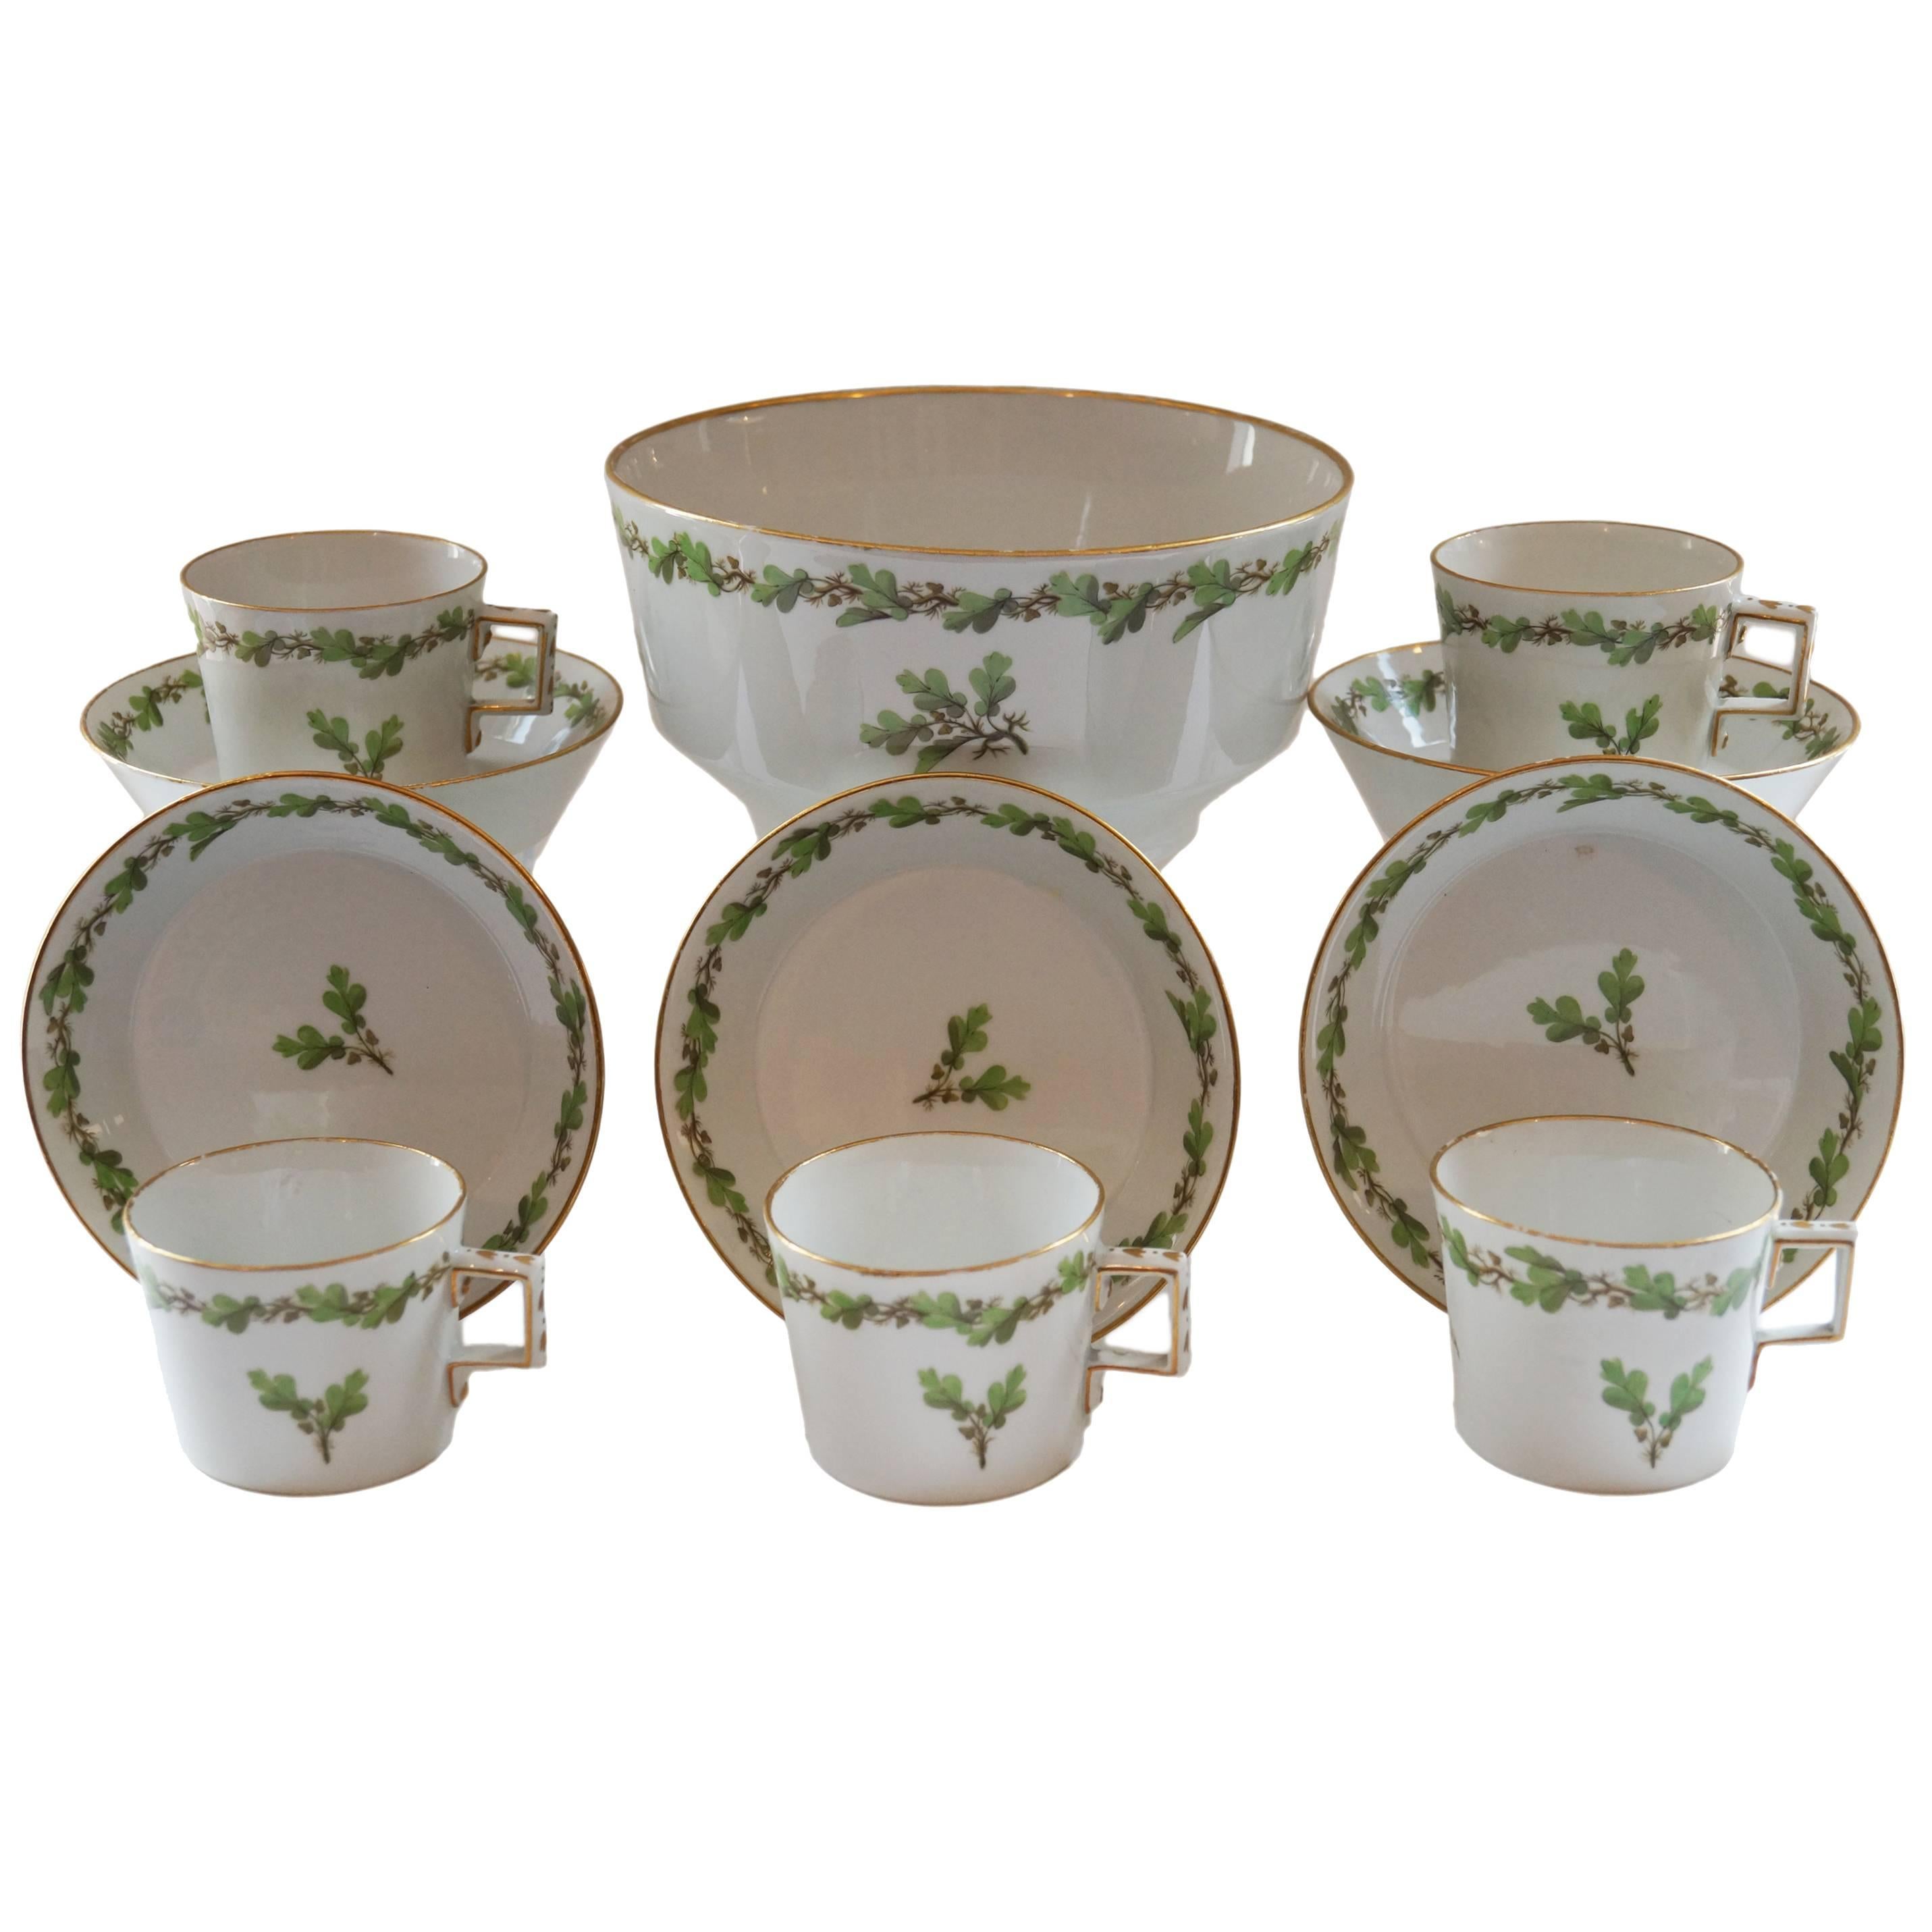 Late 18th Century Furstenberg Demitasse Bowl, Cups and Saucers For Sale